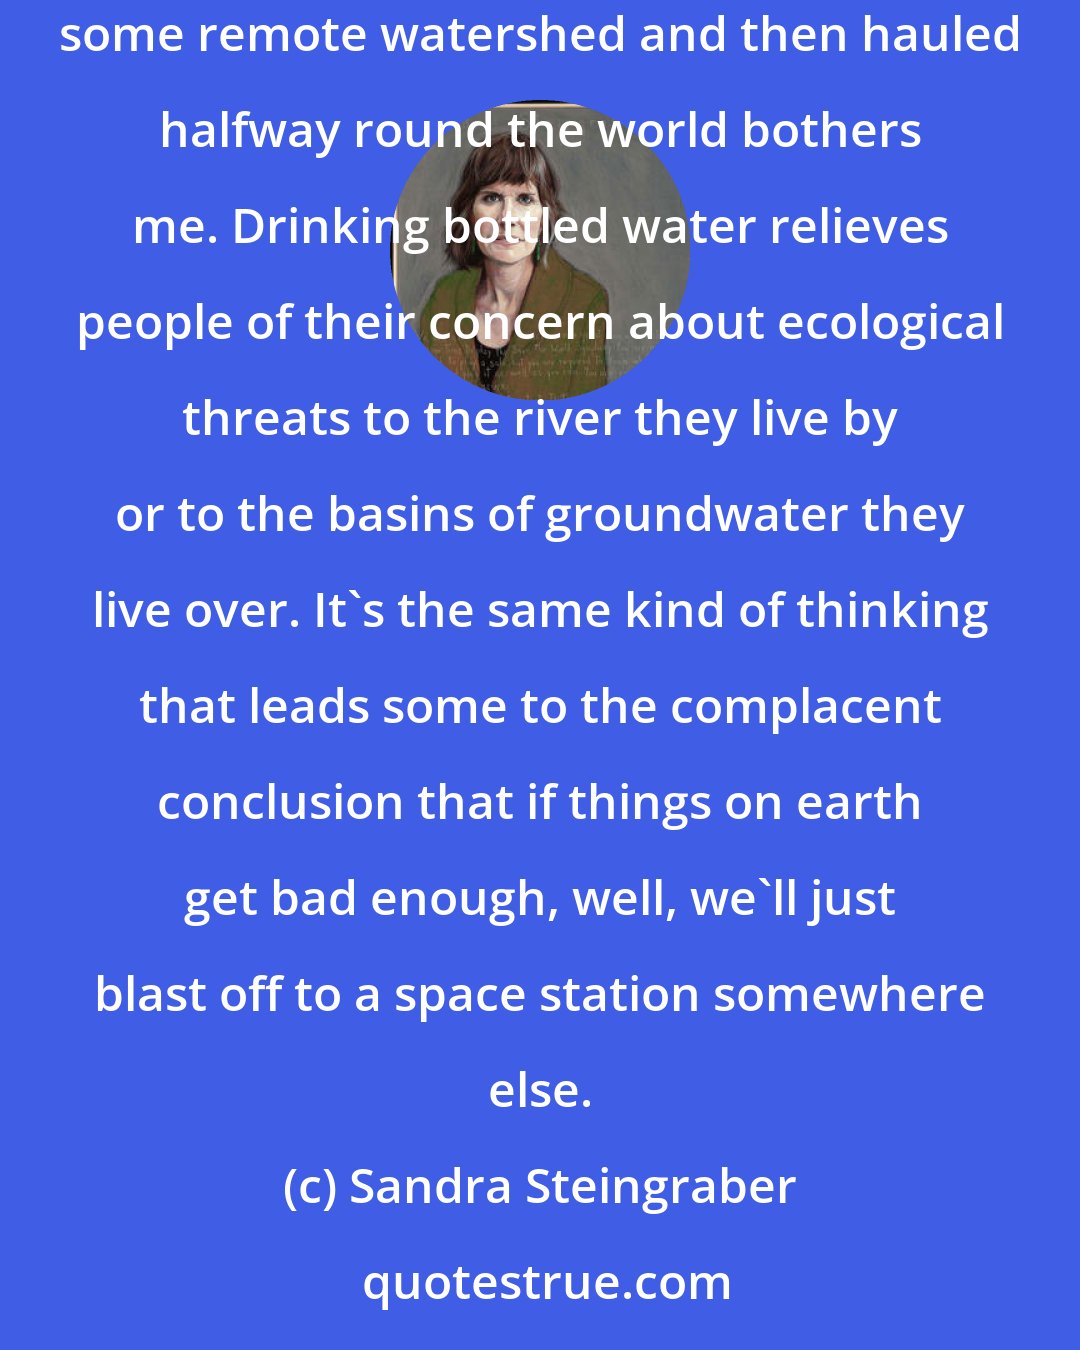 Sandra Steingraber: I have always been a big advocate of tap water-not because I think it harmless but because the idea of purchasing water extracted from some remote watershed and then hauled halfway round the world bothers me. Drinking bottled water relieves people of their concern about ecological threats to the river they live by or to the basins of groundwater they live over. It's the same kind of thinking that leads some to the complacent conclusion that if things on earth get bad enough, well, we'll just blast off to a space station somewhere else.